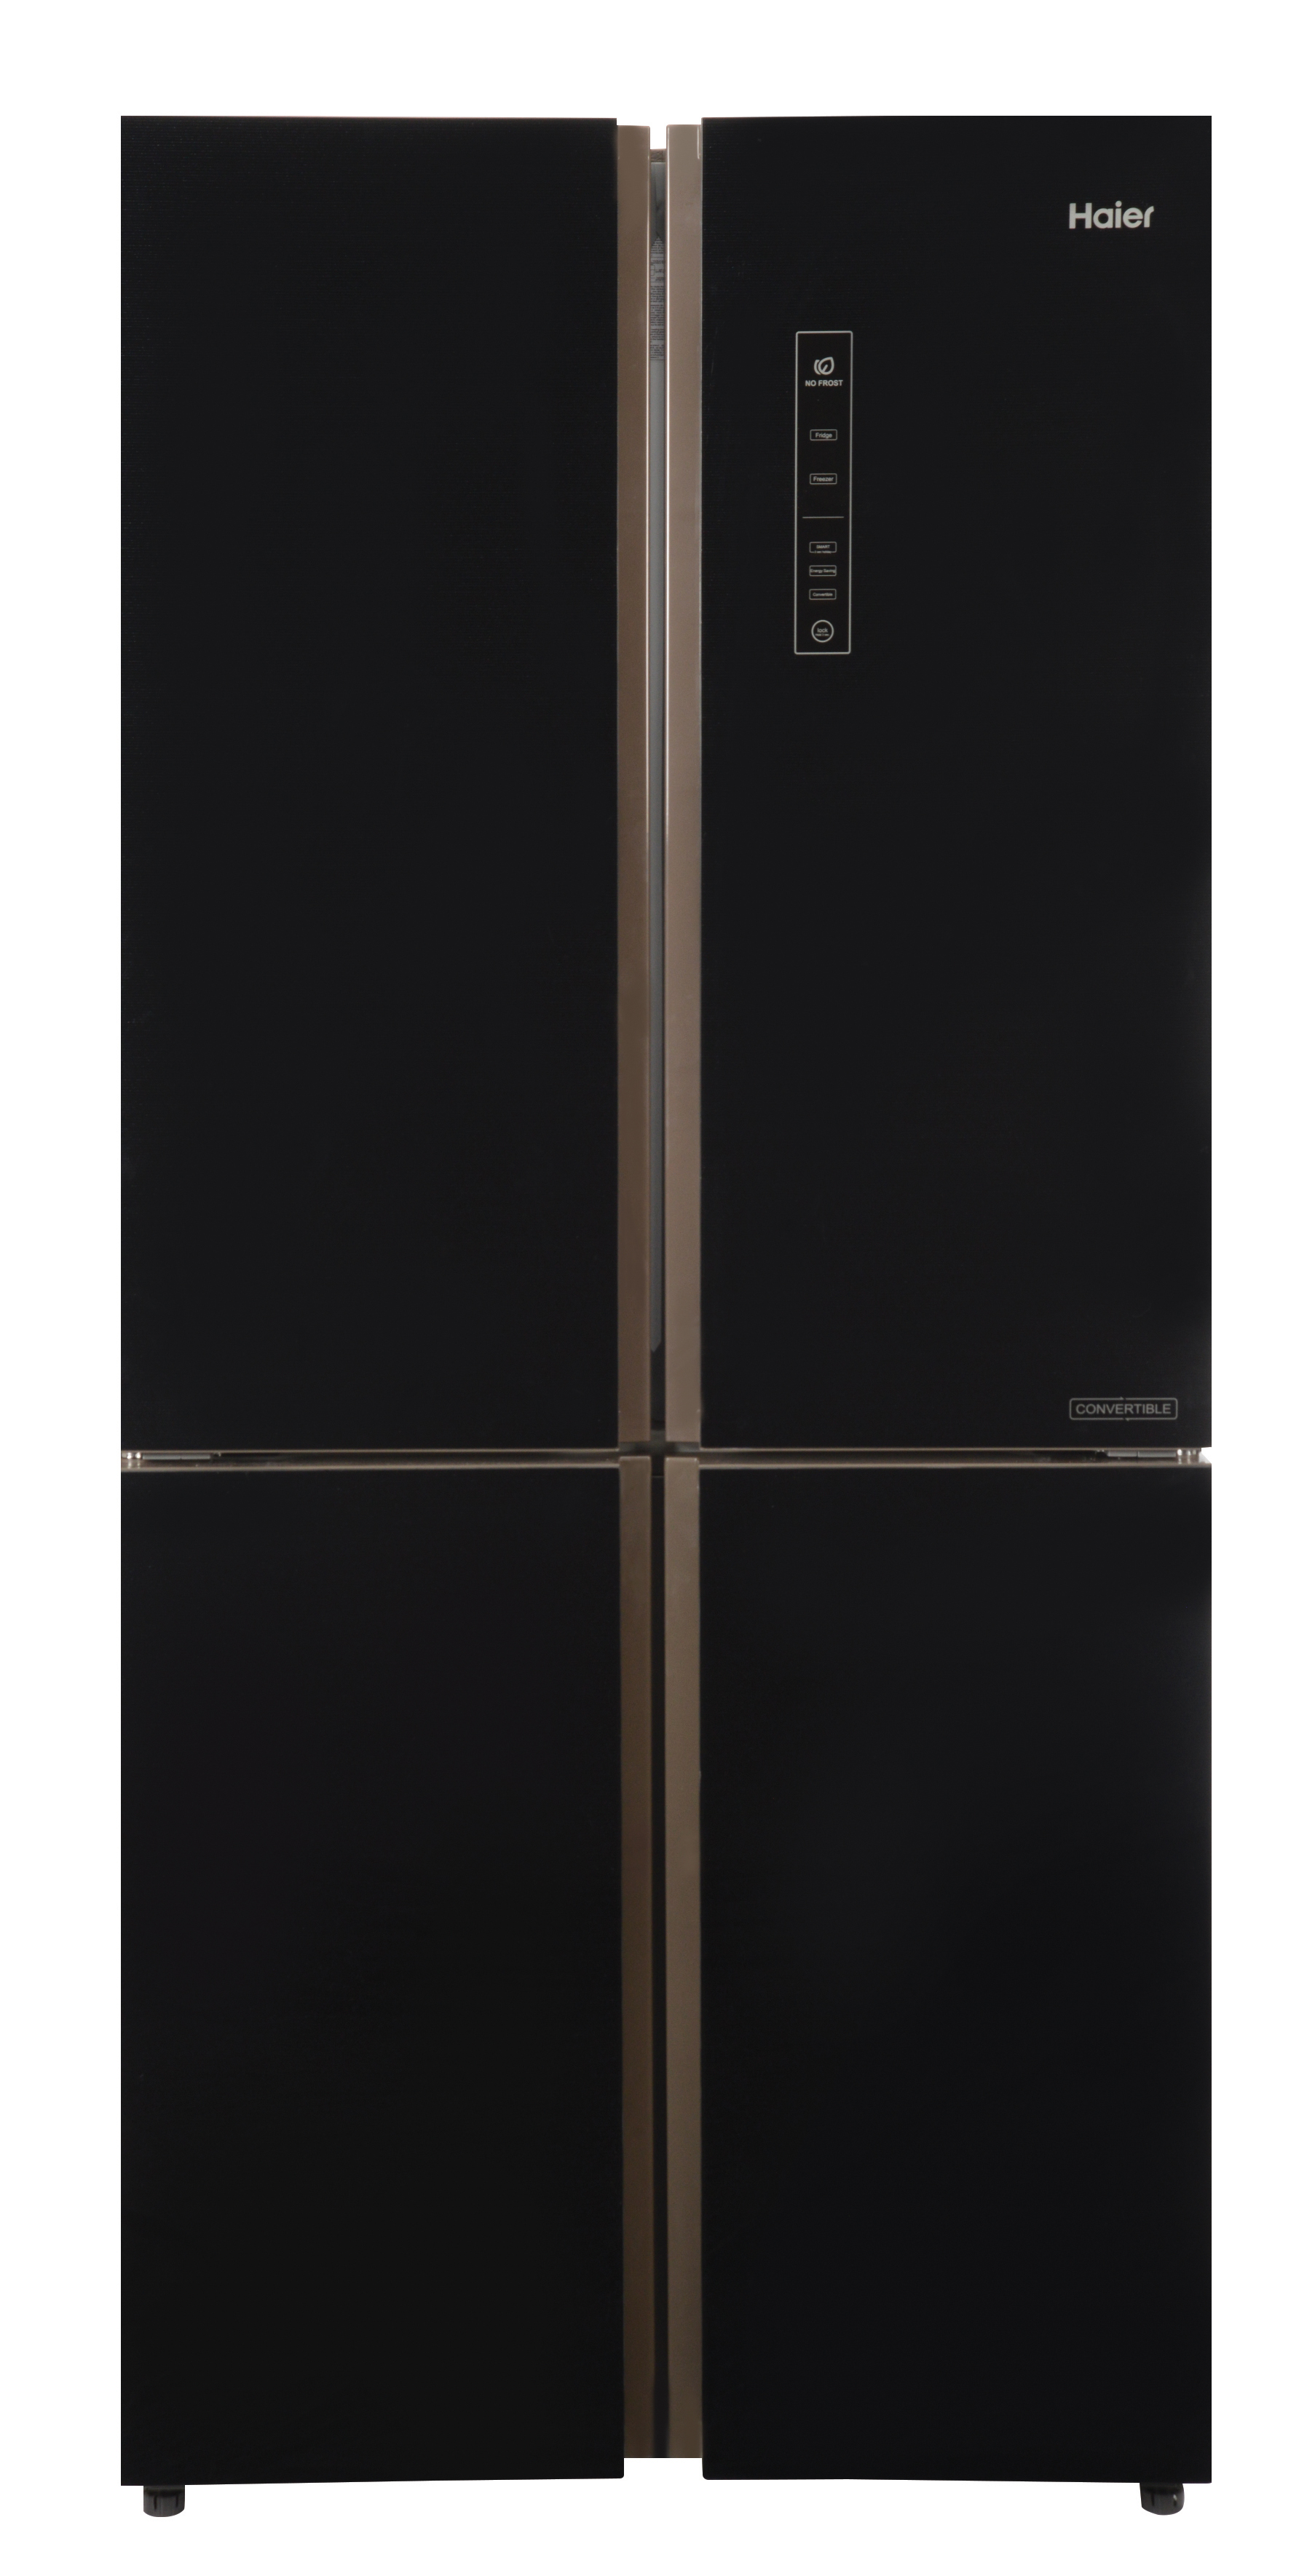 Haier Introduces all New Spacious Four-Door Bottom Mounted Refrigerator in India